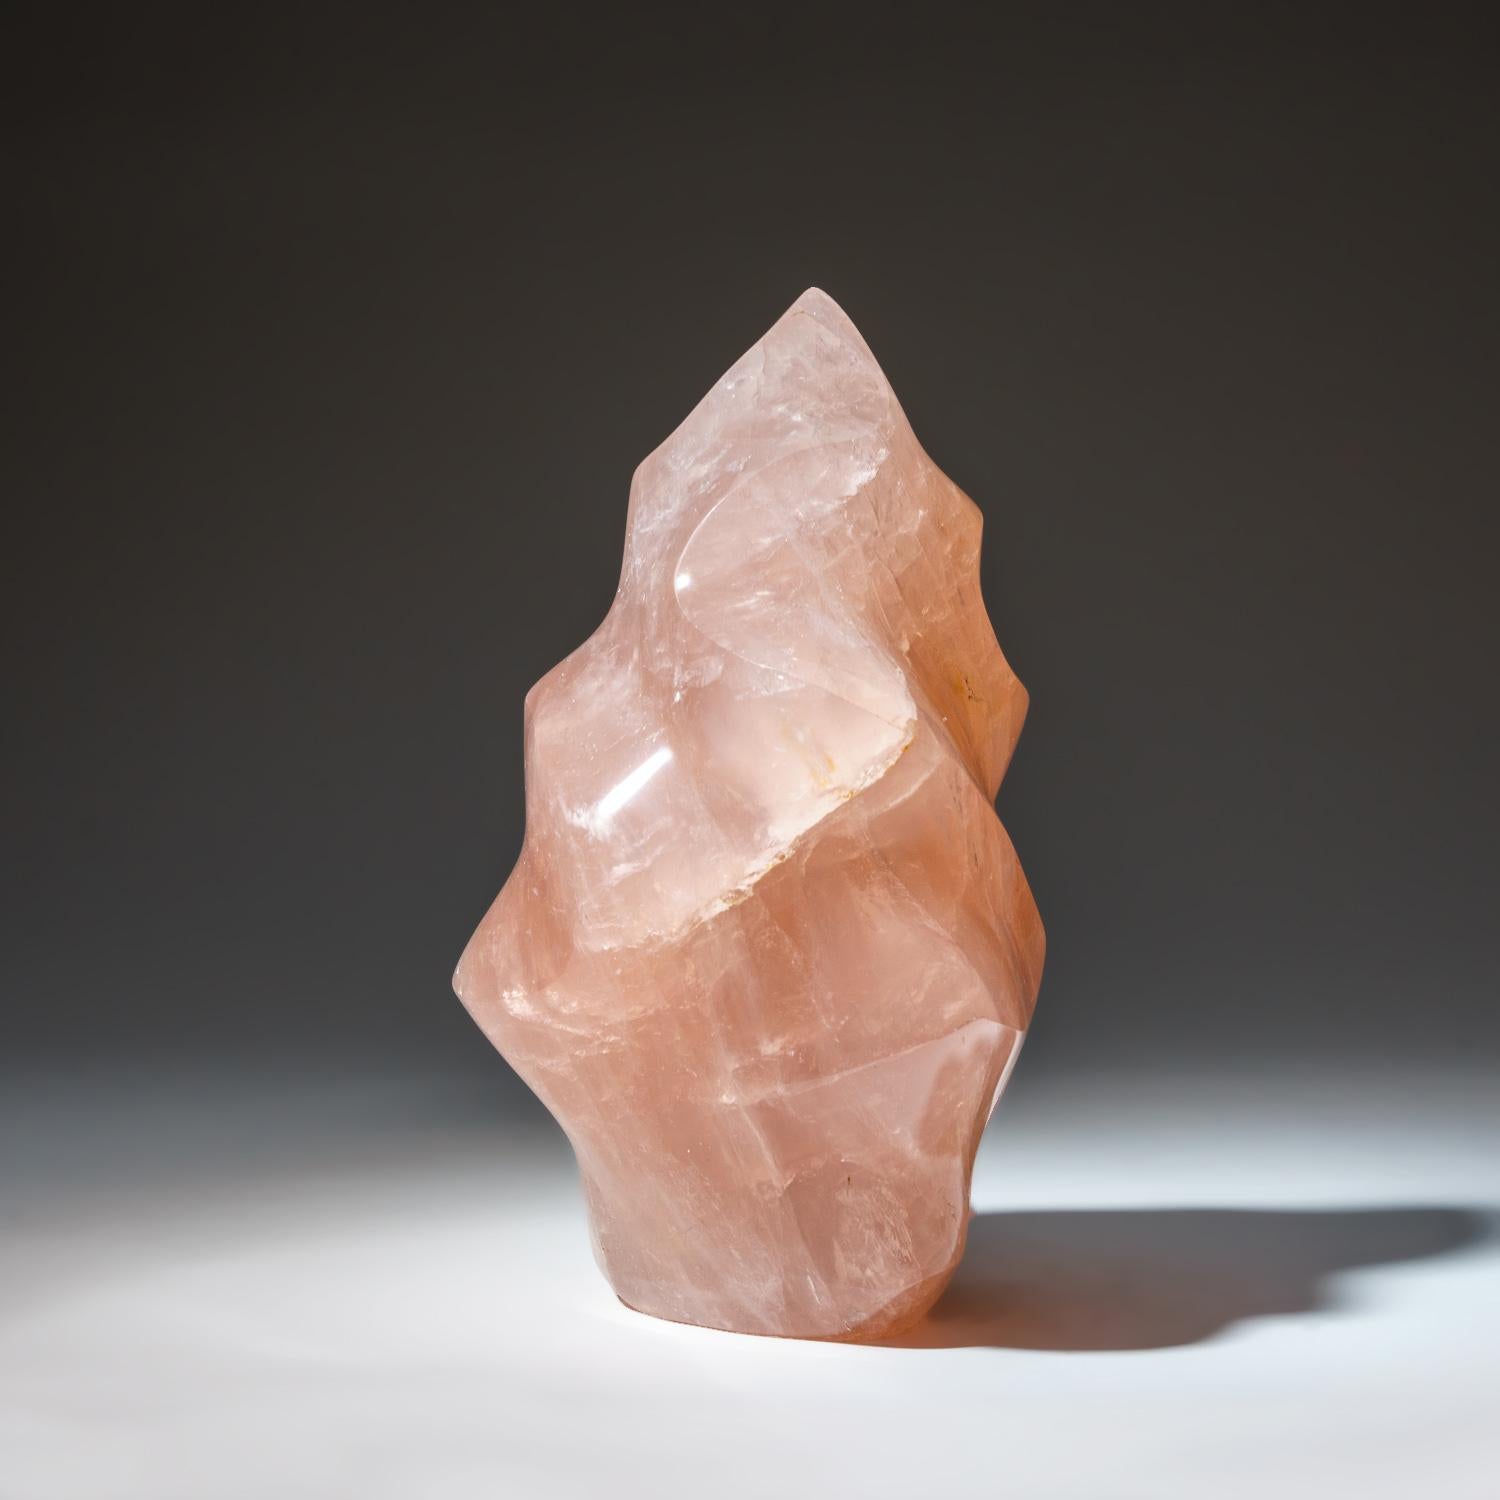 Contemporary Polished Rose Quartz Flame Freeform From Brazil (7.2 lbs) For Sale